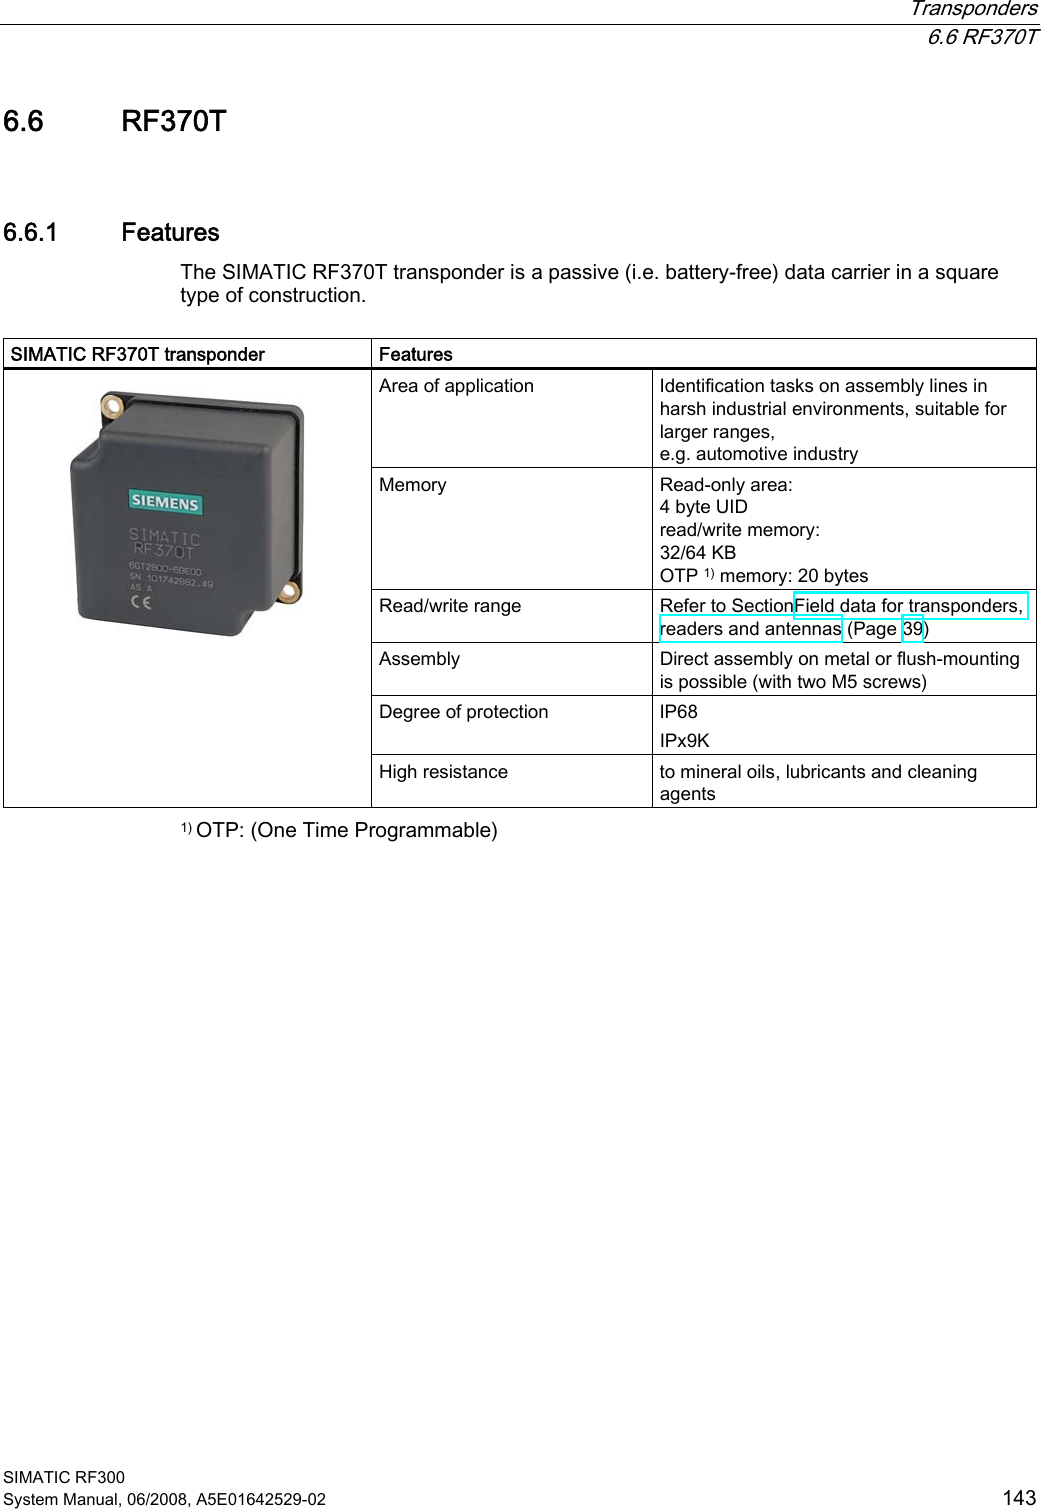  Transponders  6.6 RF370T SIMATIC RF300 System Manual, 06/2008, A5E01642529-02  143 6.6 RF370T 6.6.1 Features The SIMATIC RF370T transponder is a passive (i.e. battery-free) data carrier in a square type of construction.   SIMATIC RF370T transponder  Features Area of application  Identification tasks on assembly lines in harsh industrial environments, suitable for larger ranges,  e.g. automotive industry Memory  Read-only area: 4 byte UID read/write memory: 32/64 KB OTP 1) memory: 20 bytes Read/write range  Refer to SectionField data for transponders, readers and antennas (Page 39) Assembly  Direct assembly on metal or flush-mounting is possible (with two M5 screws) Degree of protection  IP68 IPx9K    High resistance  to mineral oils, lubricants and cleaning agents 1) OTP: (One Time Programmable) 